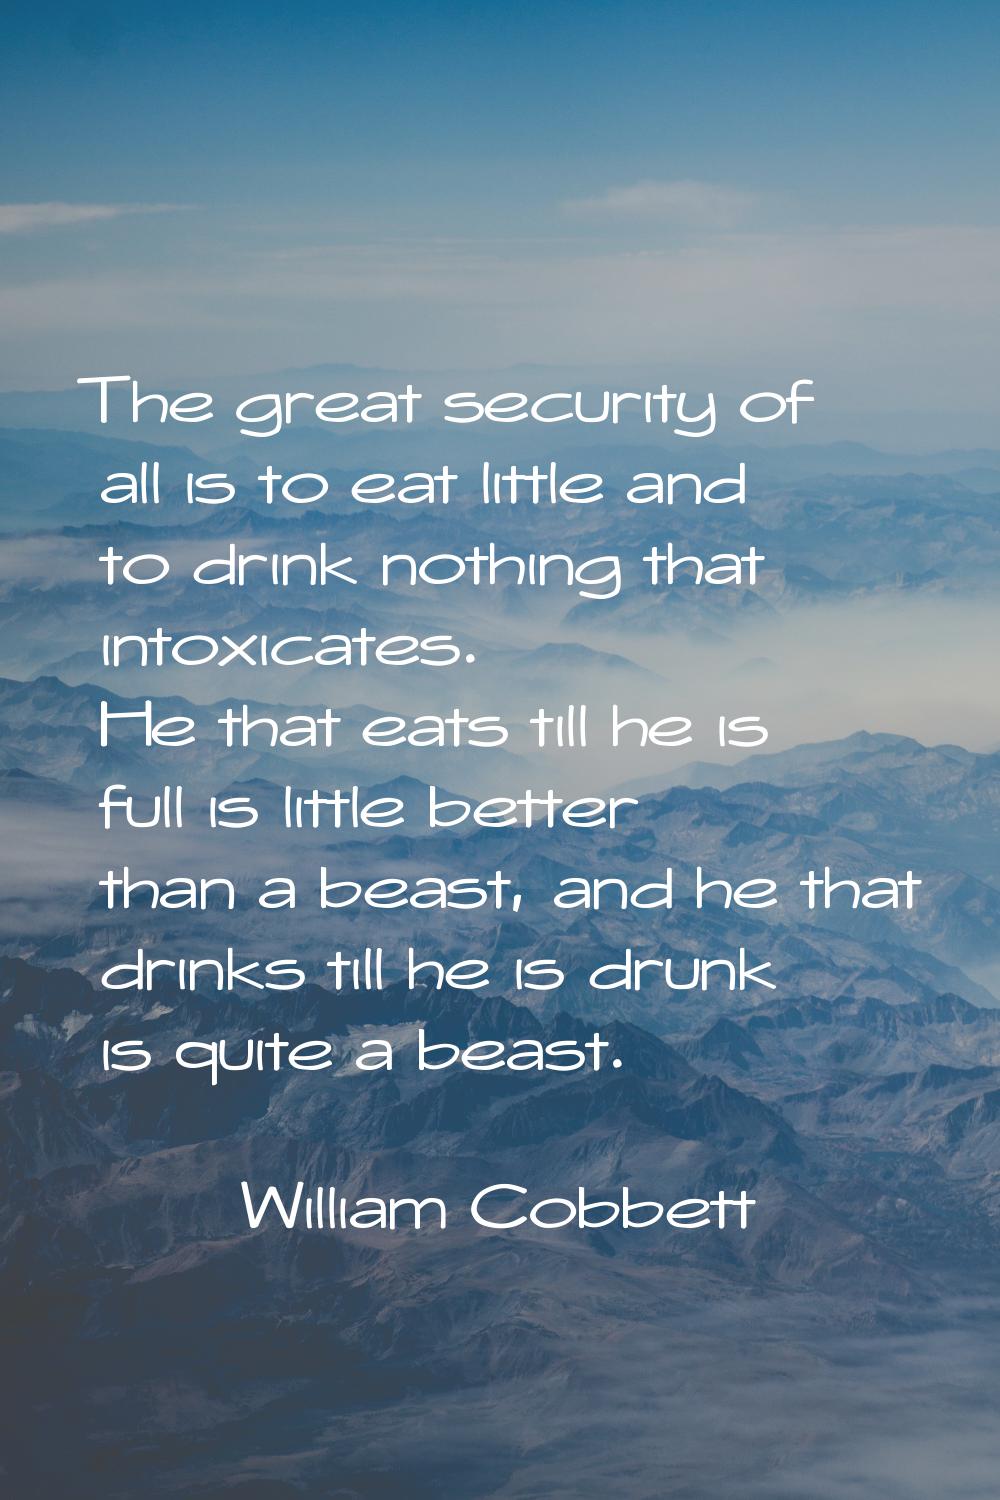 The great security of all is to eat little and to drink nothing that intoxicates. He that eats till